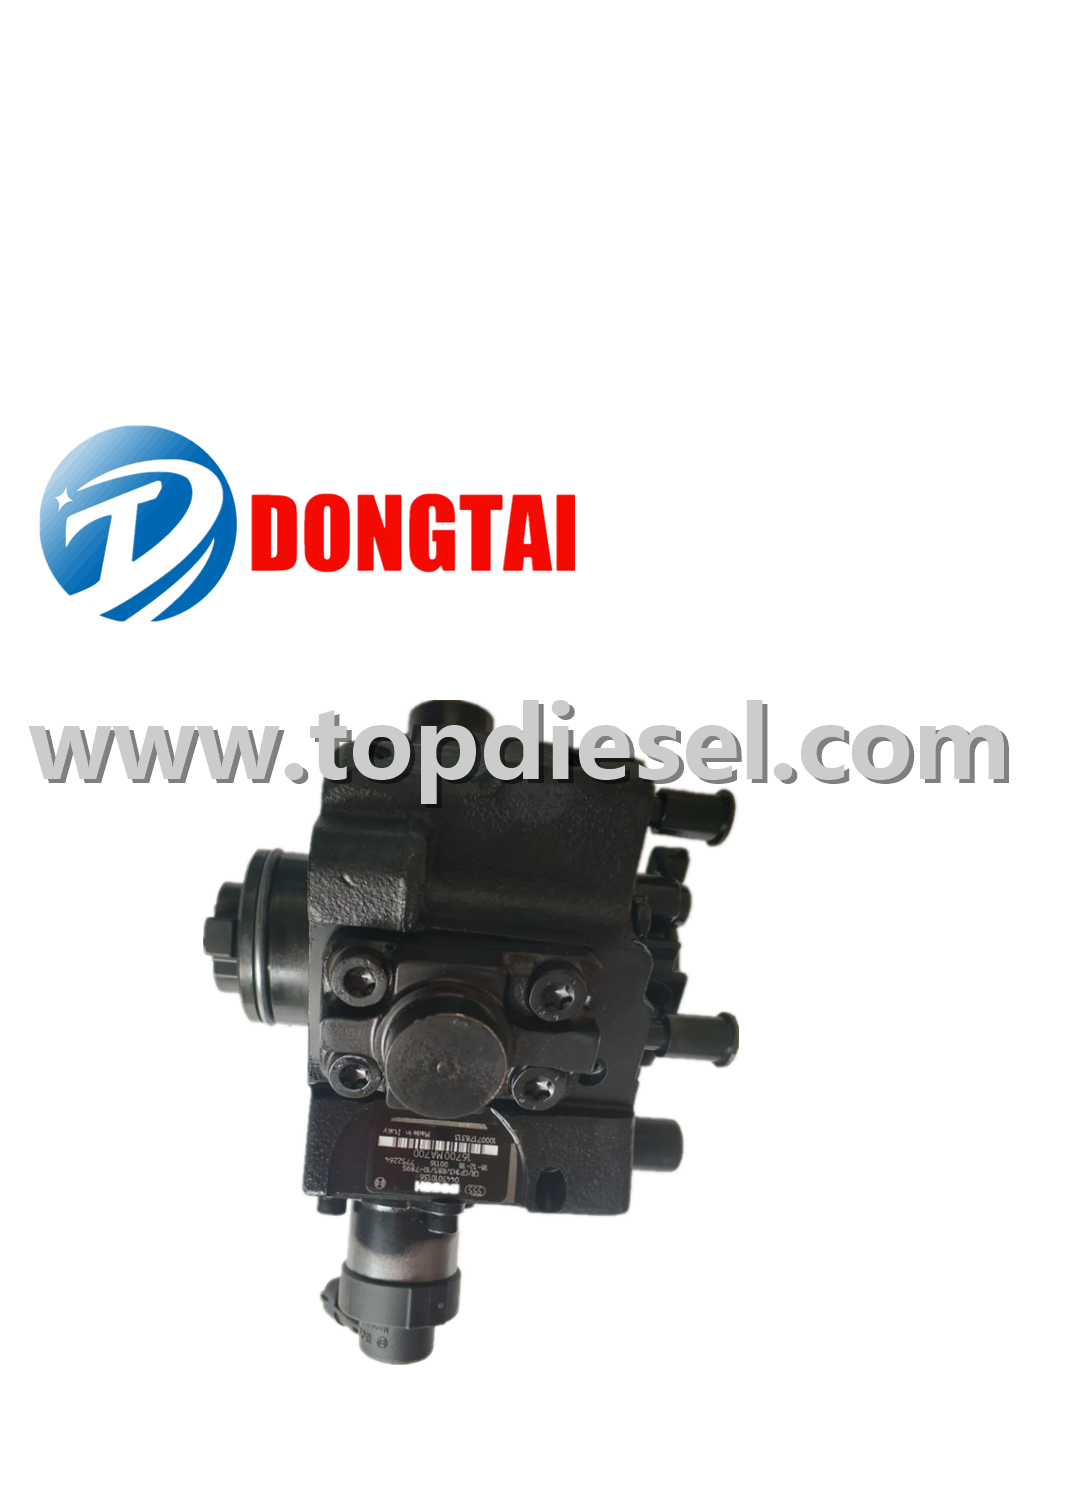 Special Design for Portable Fuel Injector Flow Tool - 0445010185 – Dongtai